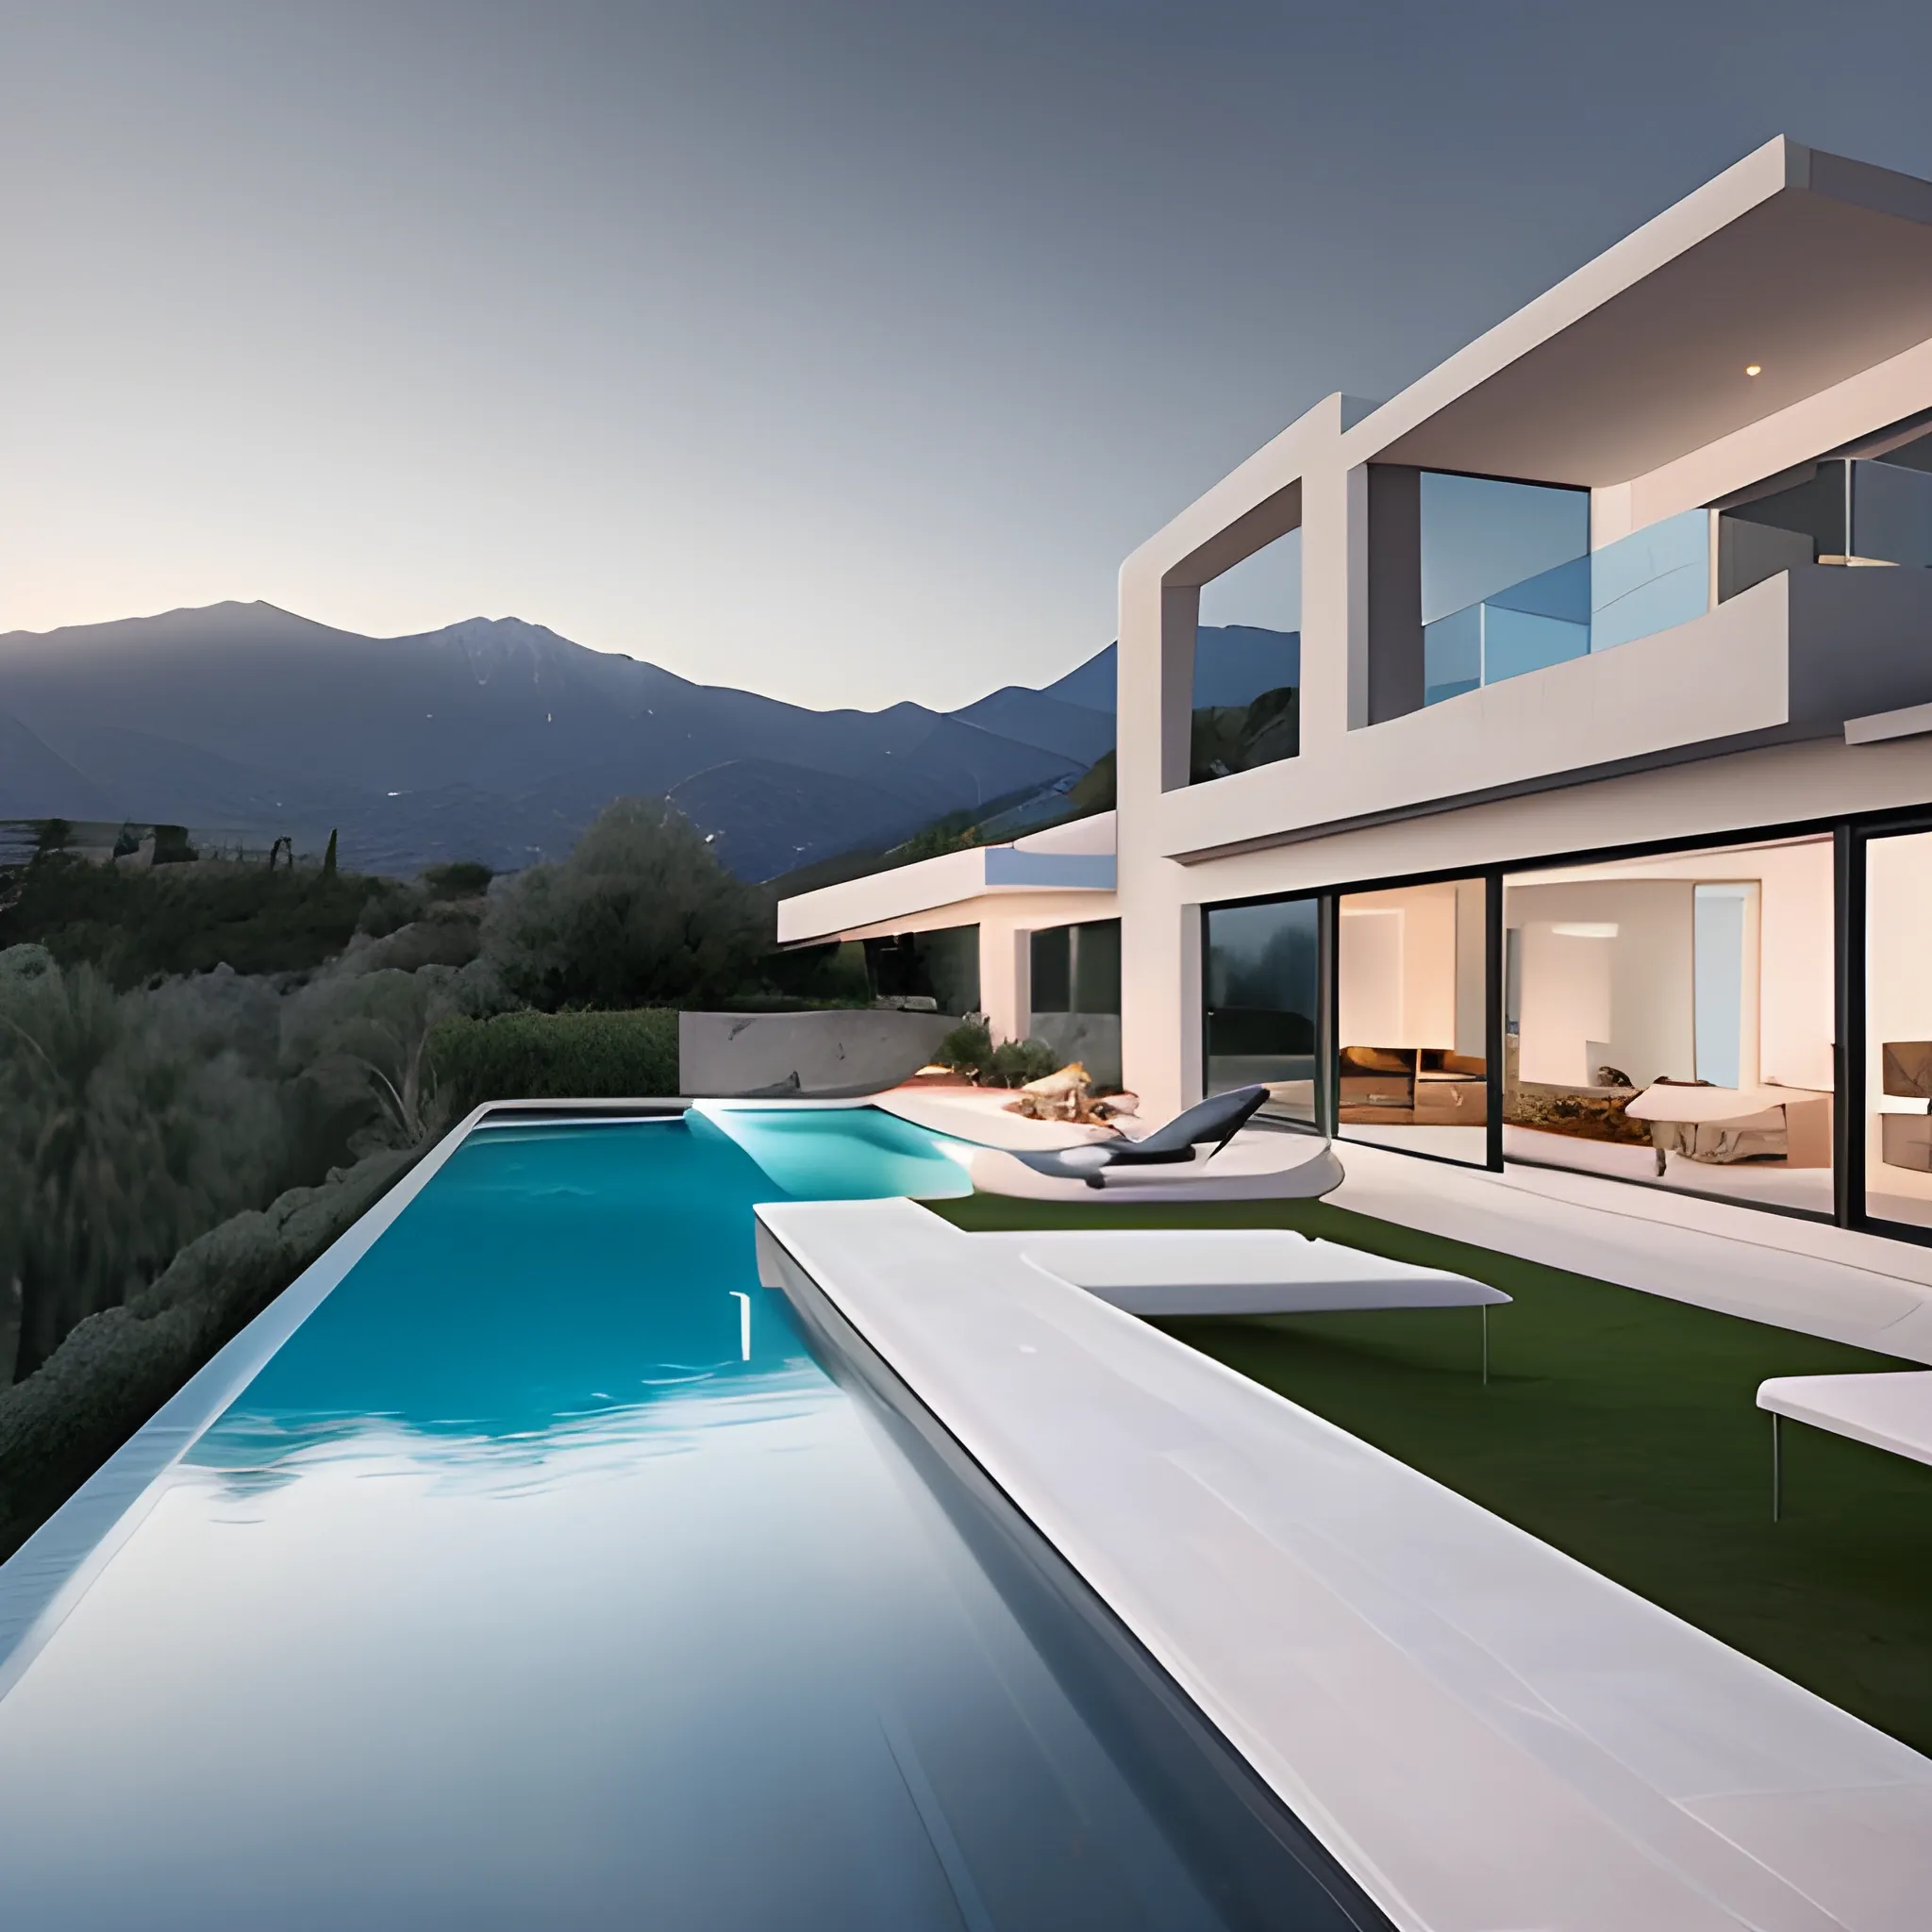 A one story modern villa in dark grey color with infinity pool overlooking the mount canigou. A palm tree on the right side of the pool. 
